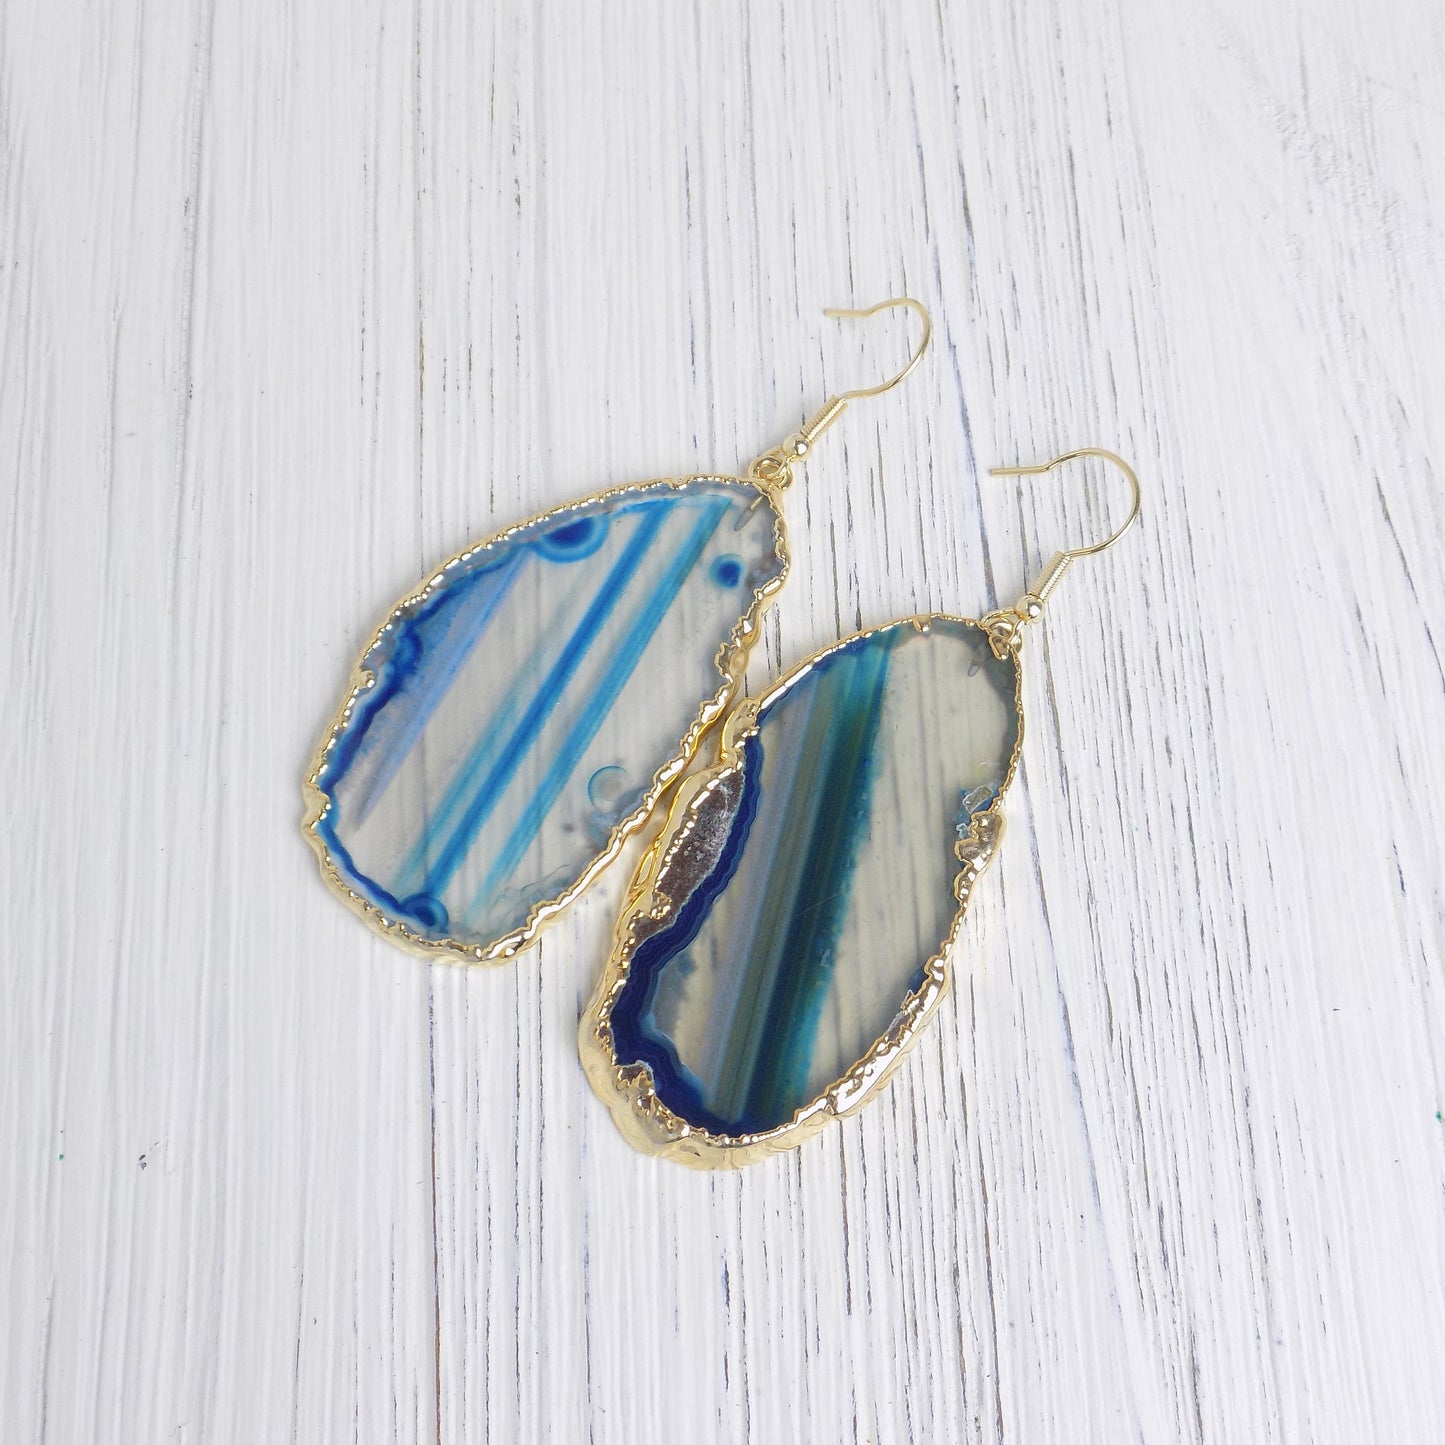 Large Statement Blue Agate Slice Dangle Earrings Gold Plated, Christmas Gift Women, G14-106